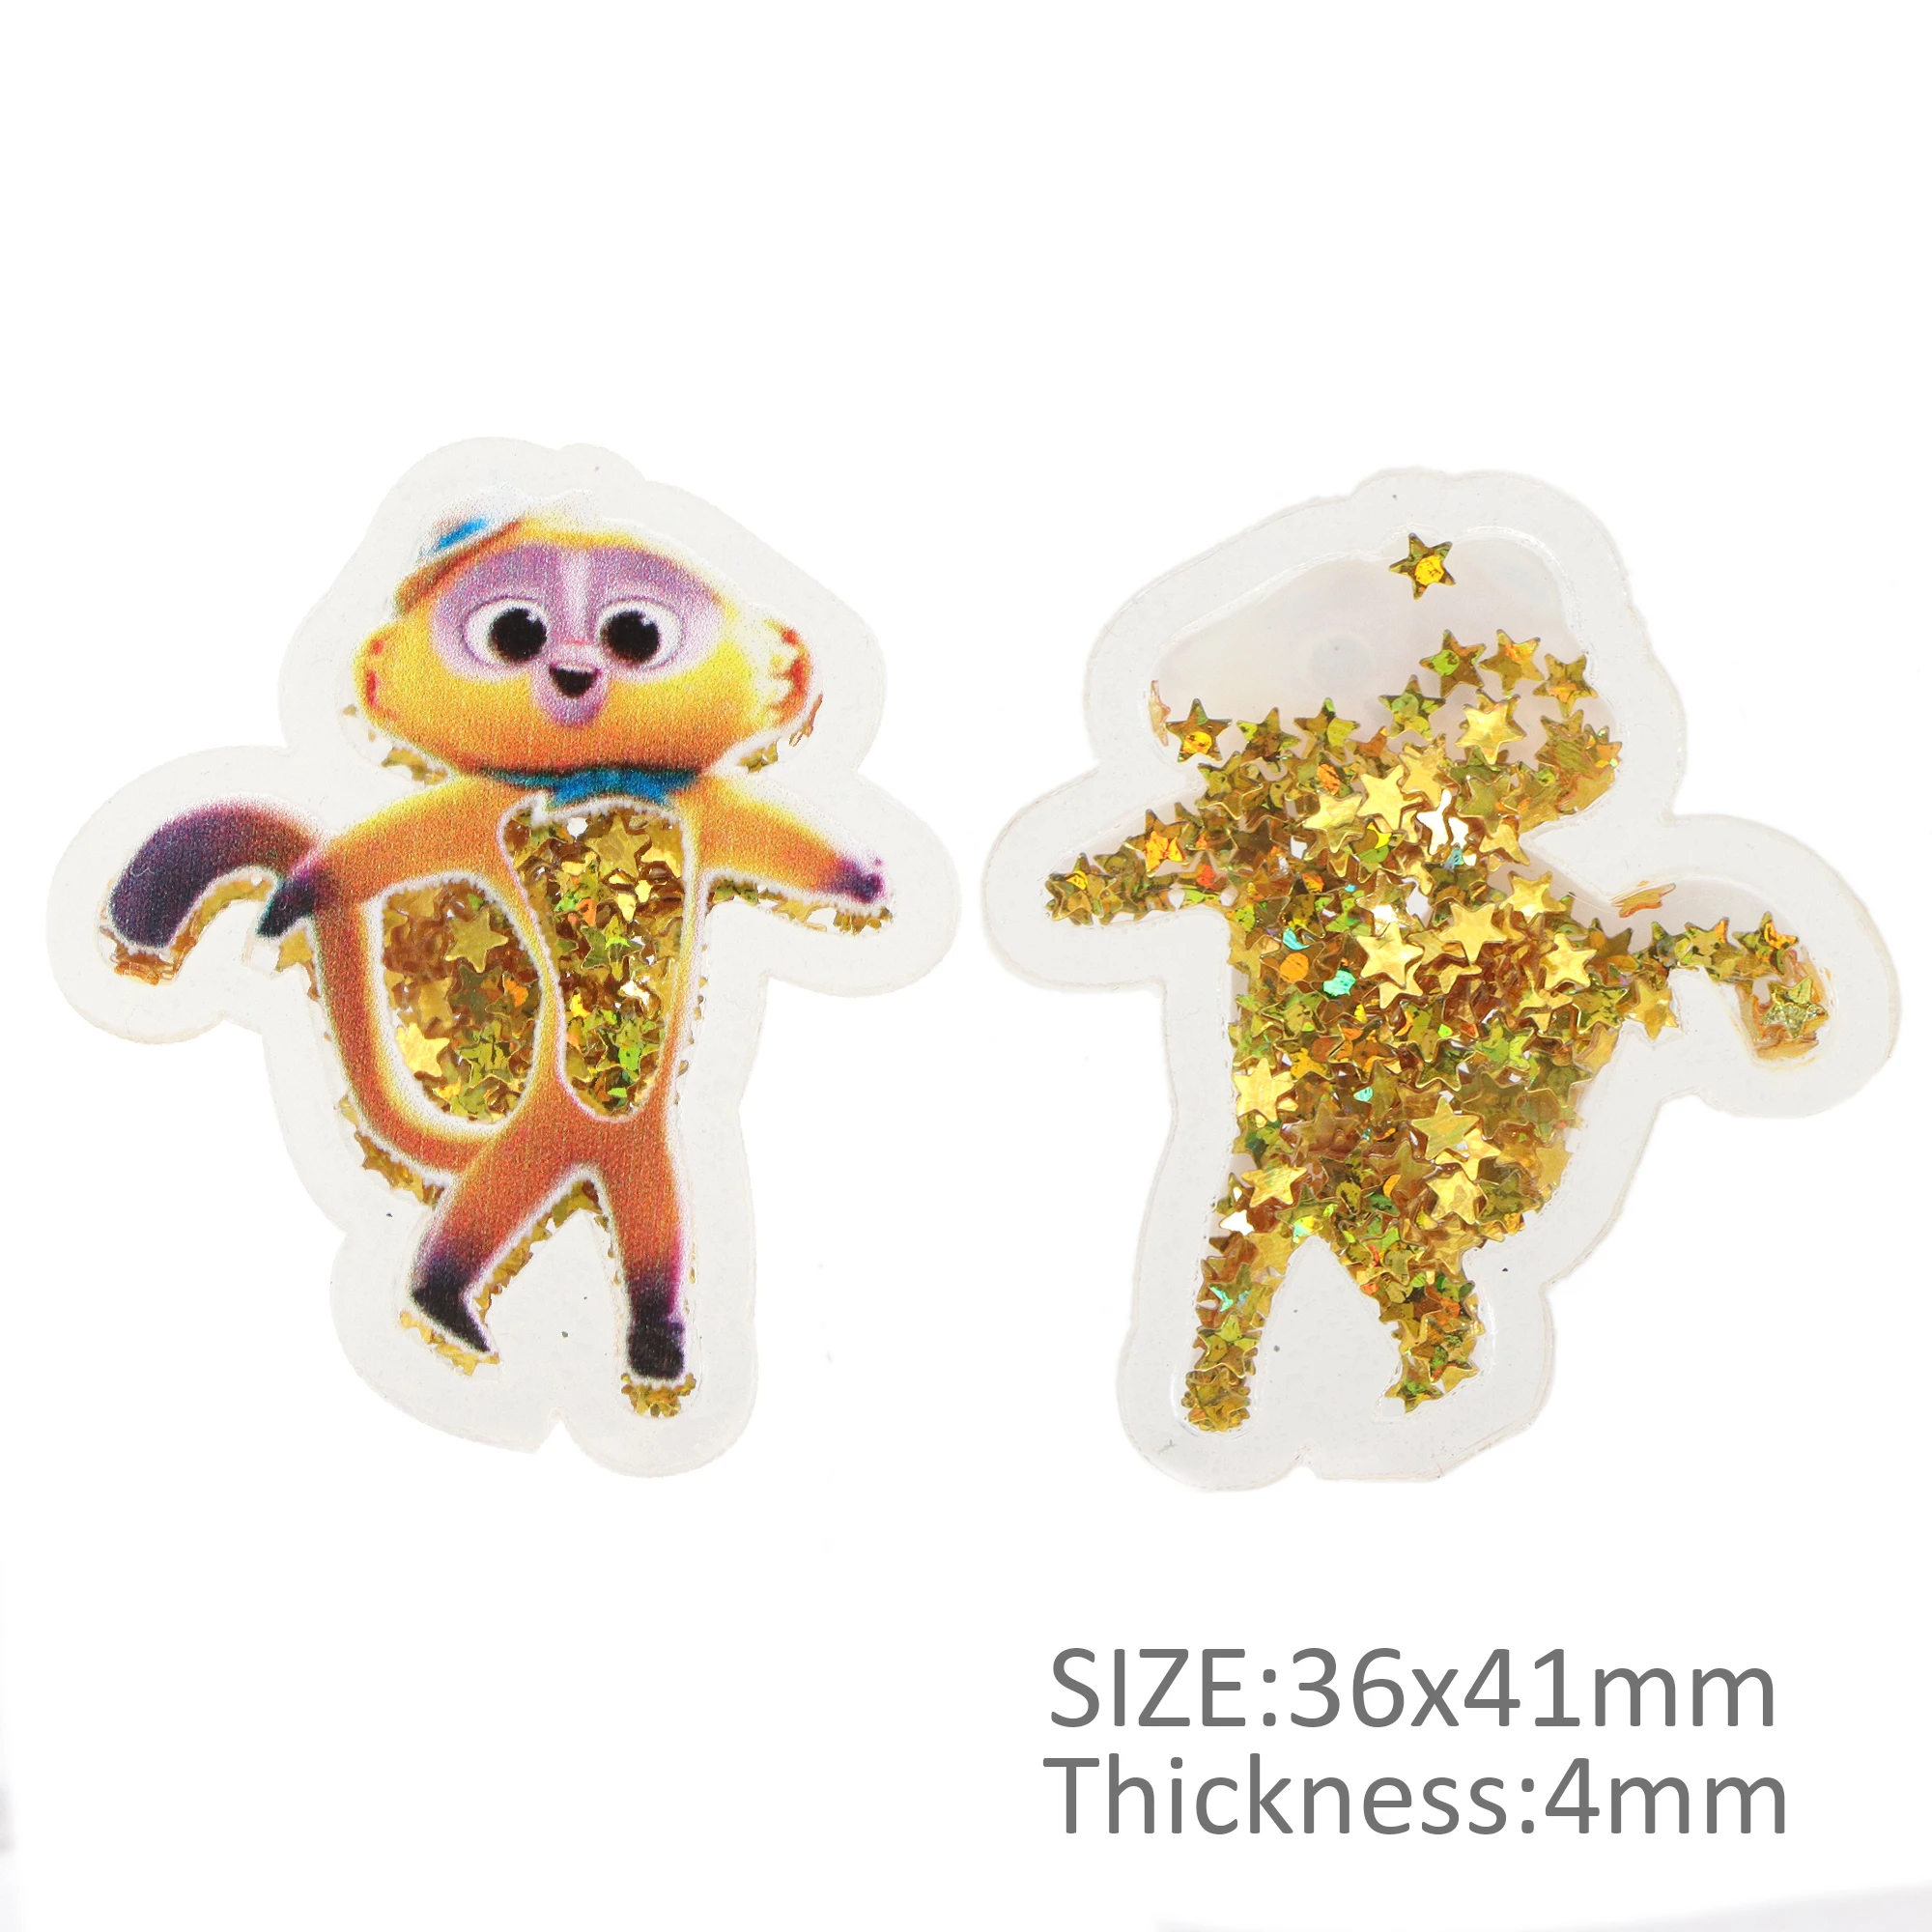 2pcs Quicksand Acrylic Planar Resin Applique for DIY Clothes Sequin Shakers Hat Headwear Hair Clips Bow Accessories,2Yc22319 miniature bird figurines Figurines & Miniatures